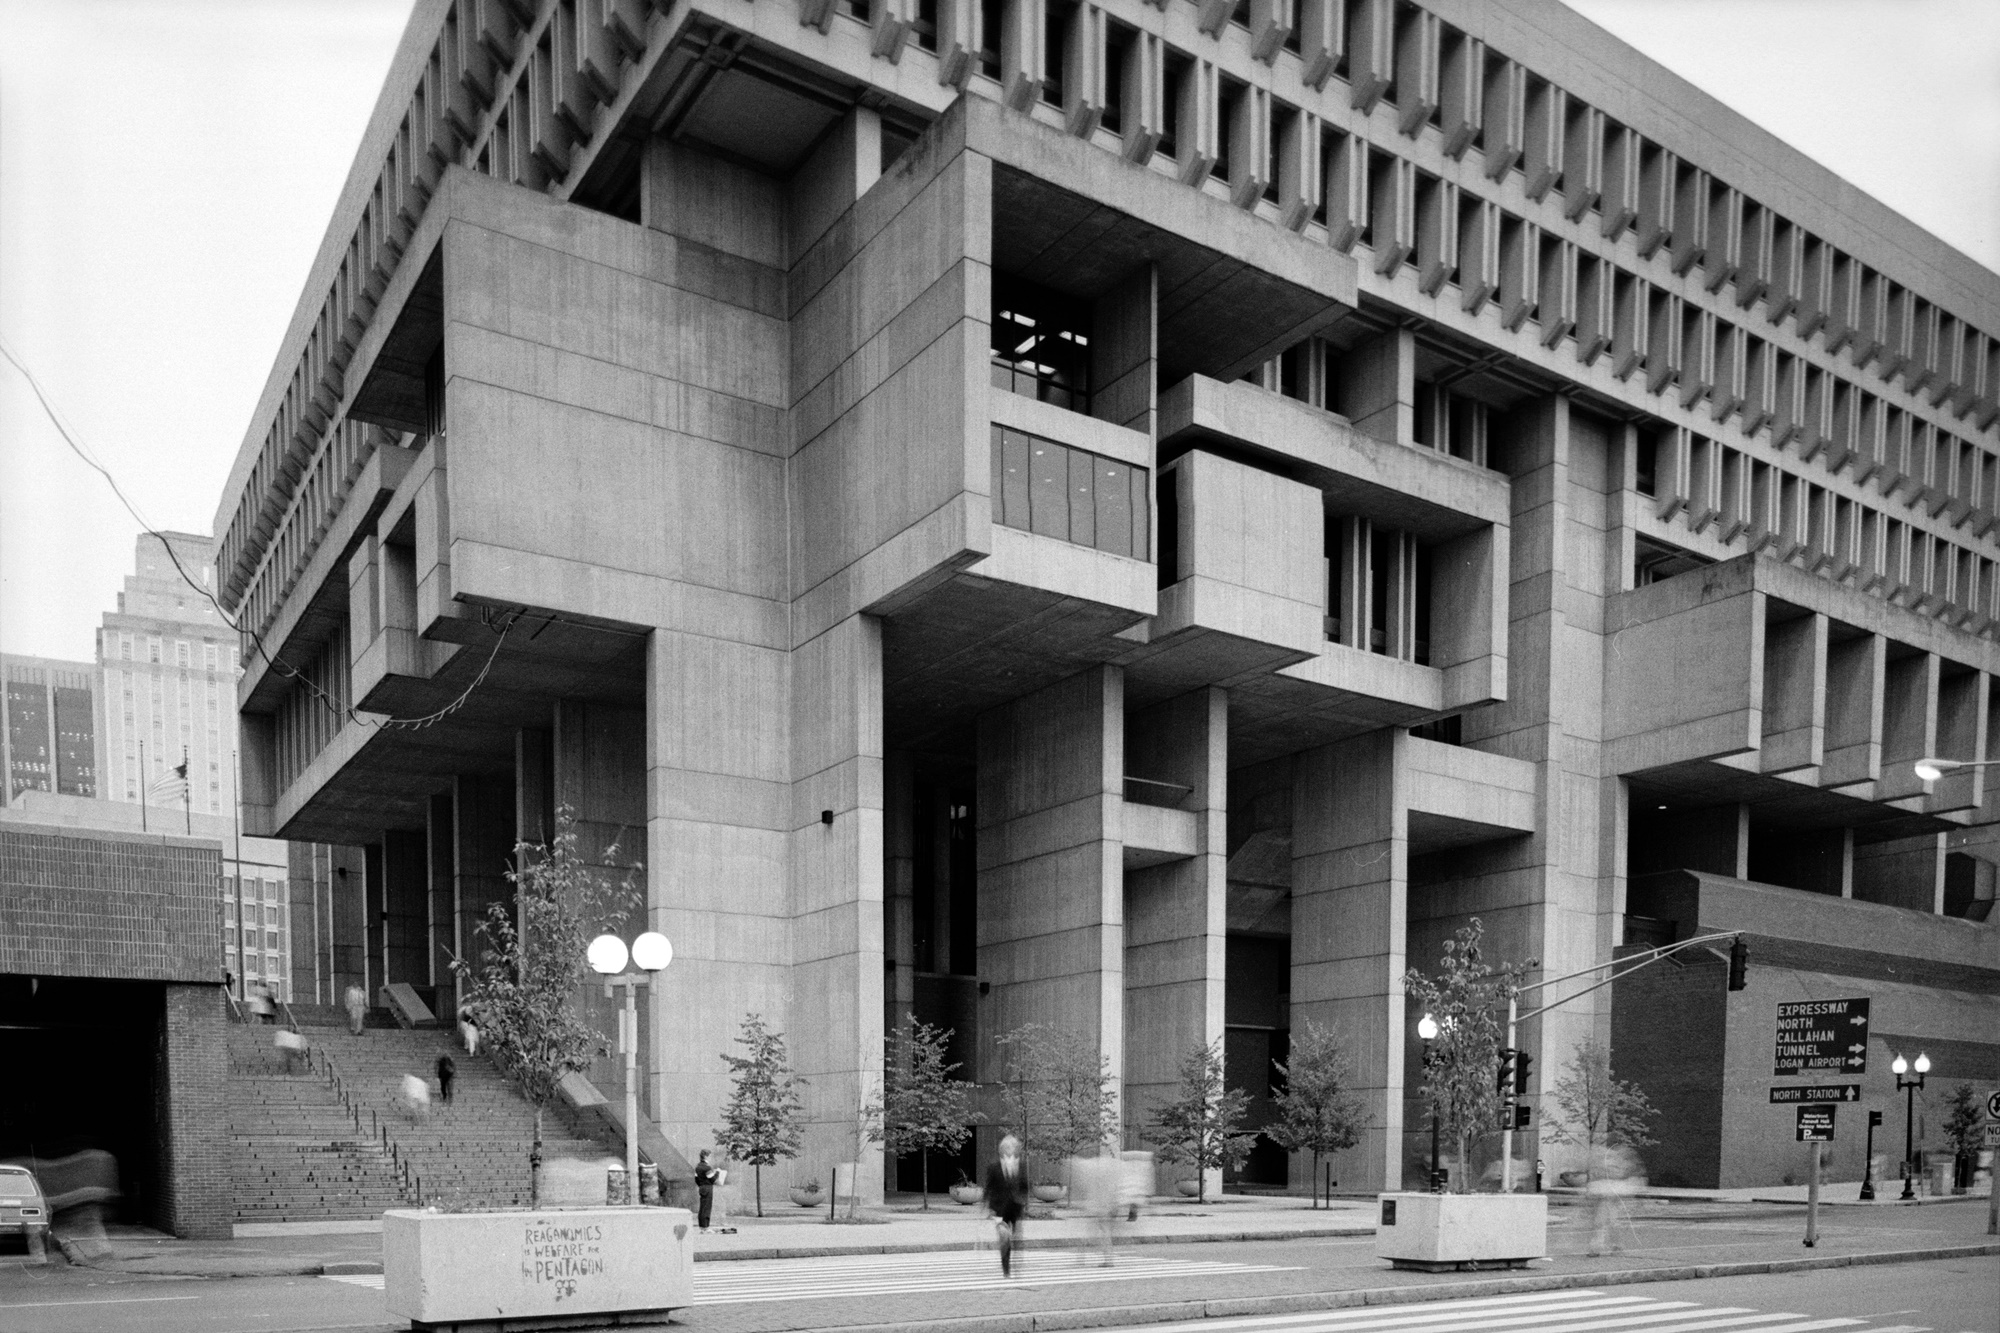 Heroic: Concrete Architecture and the New Boston | Thinkpiece ...